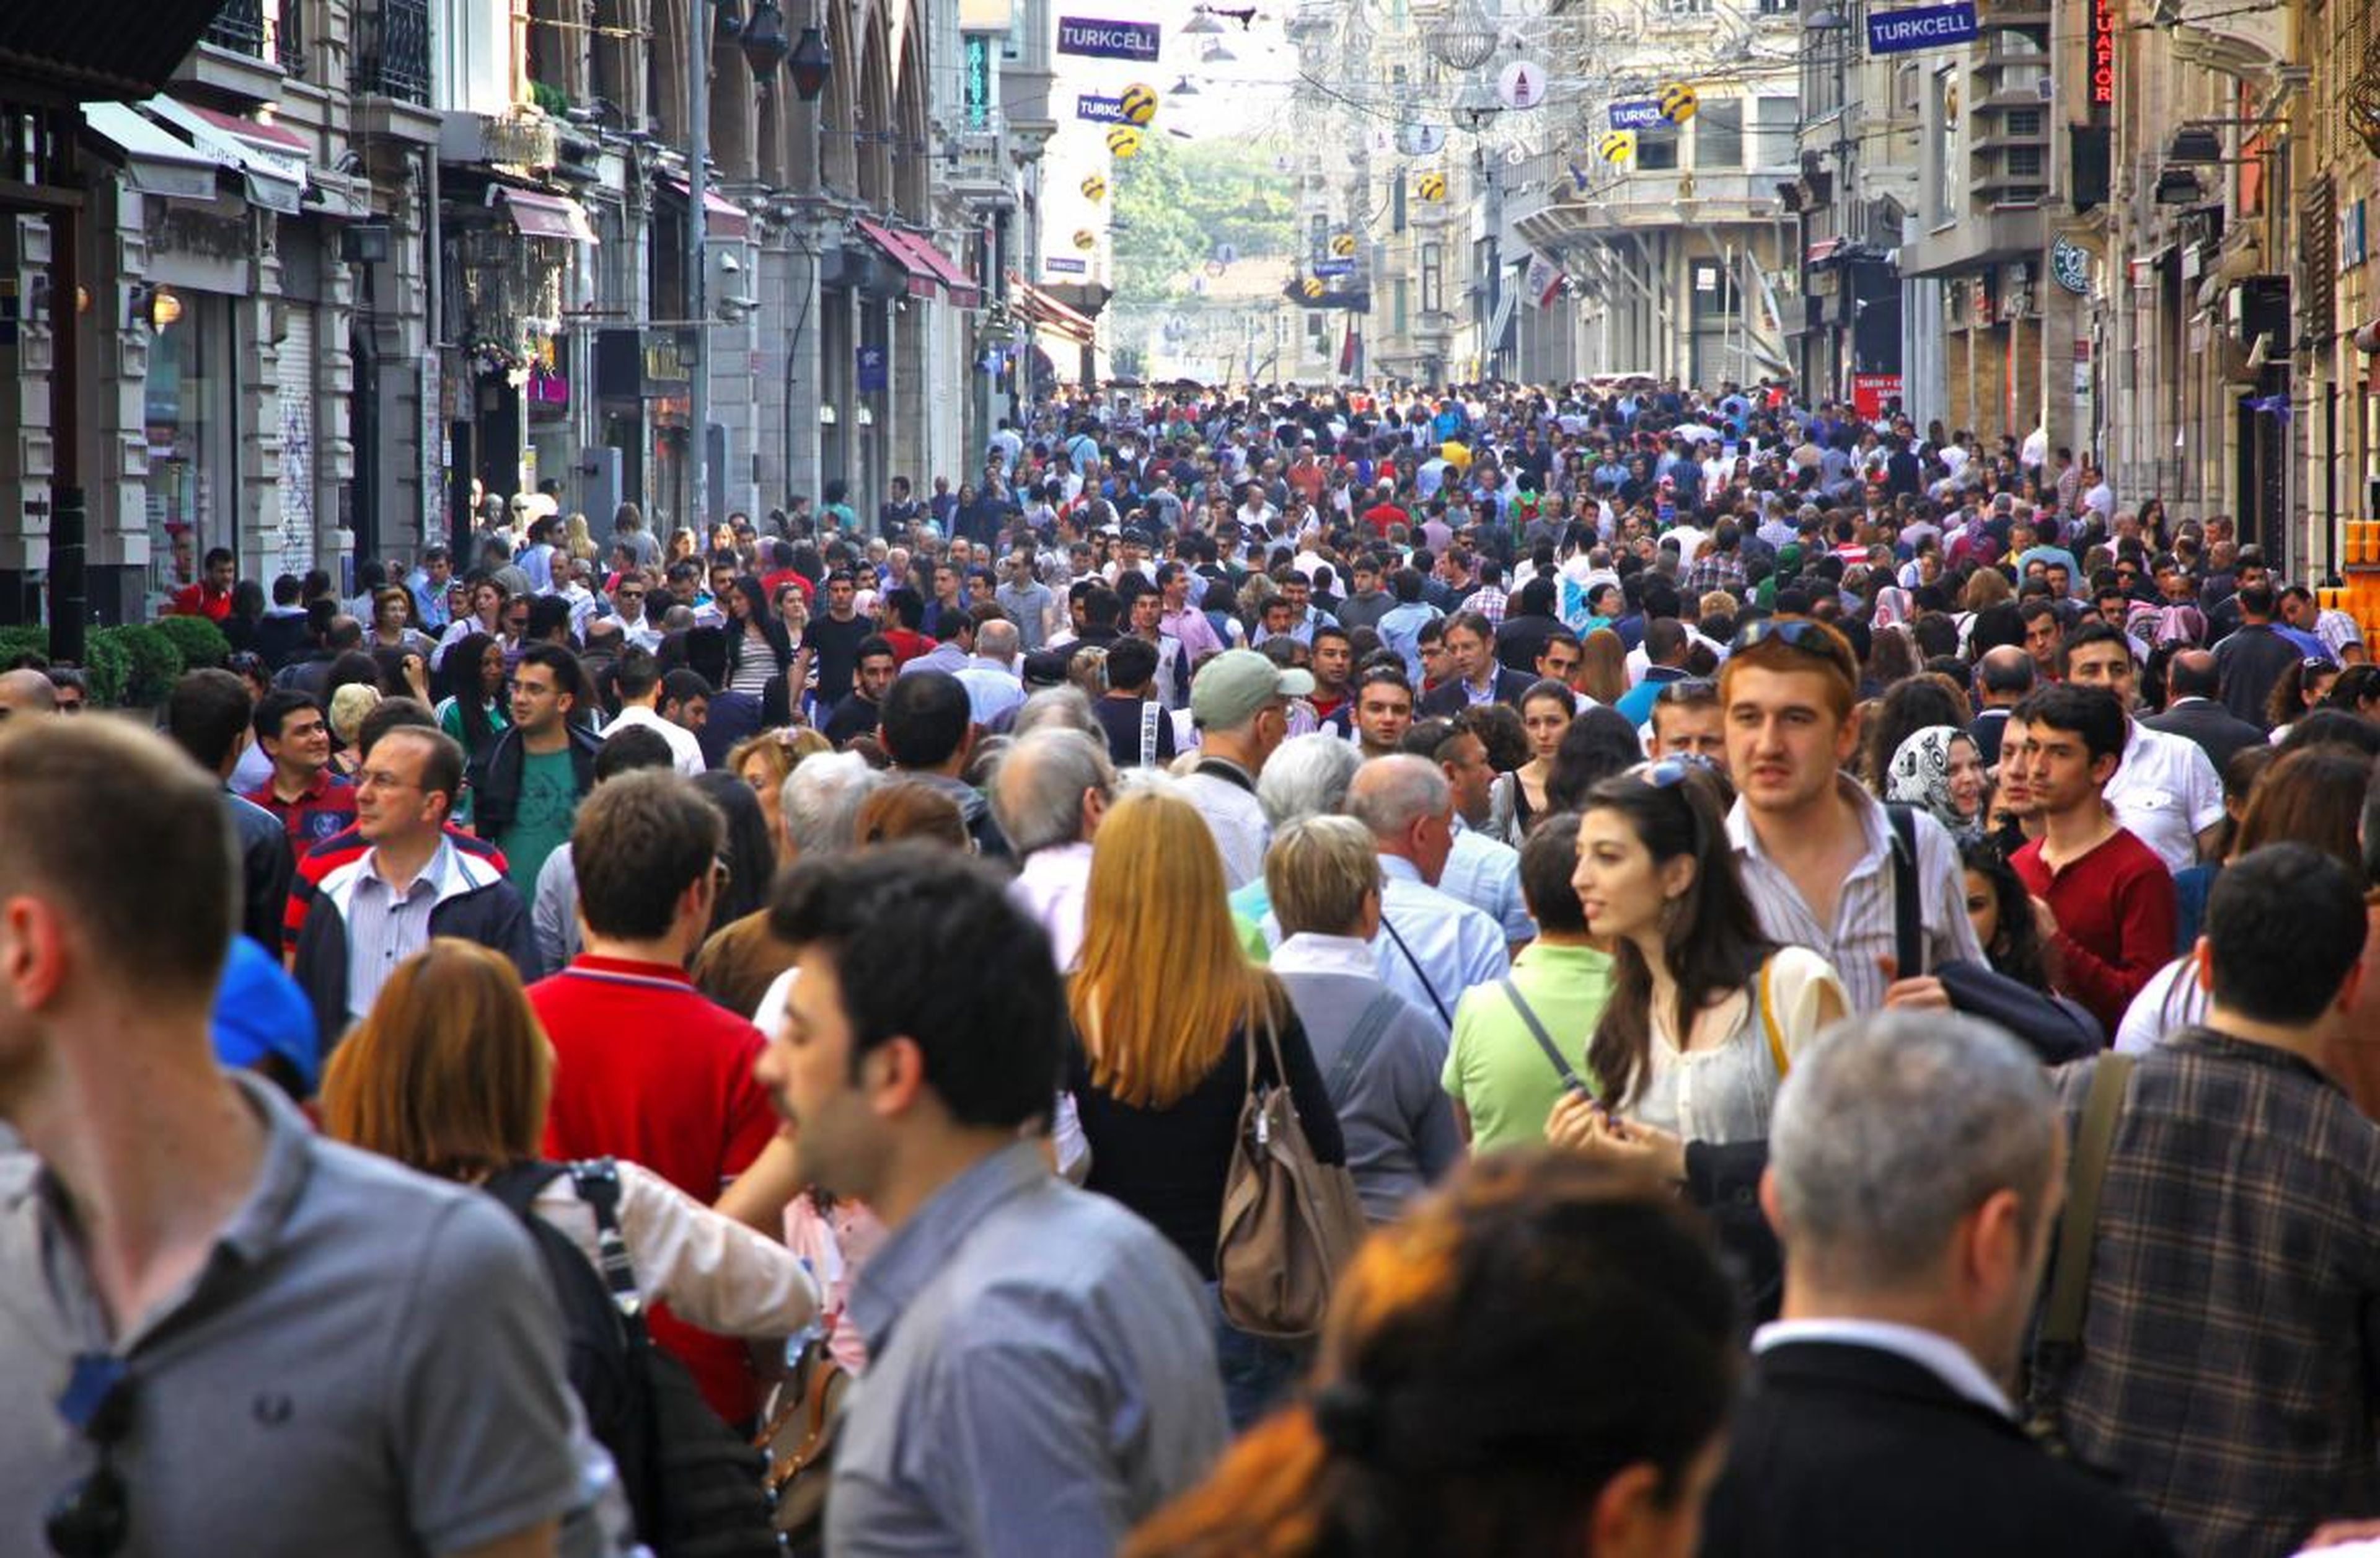 The average commuter in Istanbul spends 59 hours every year in traffic.